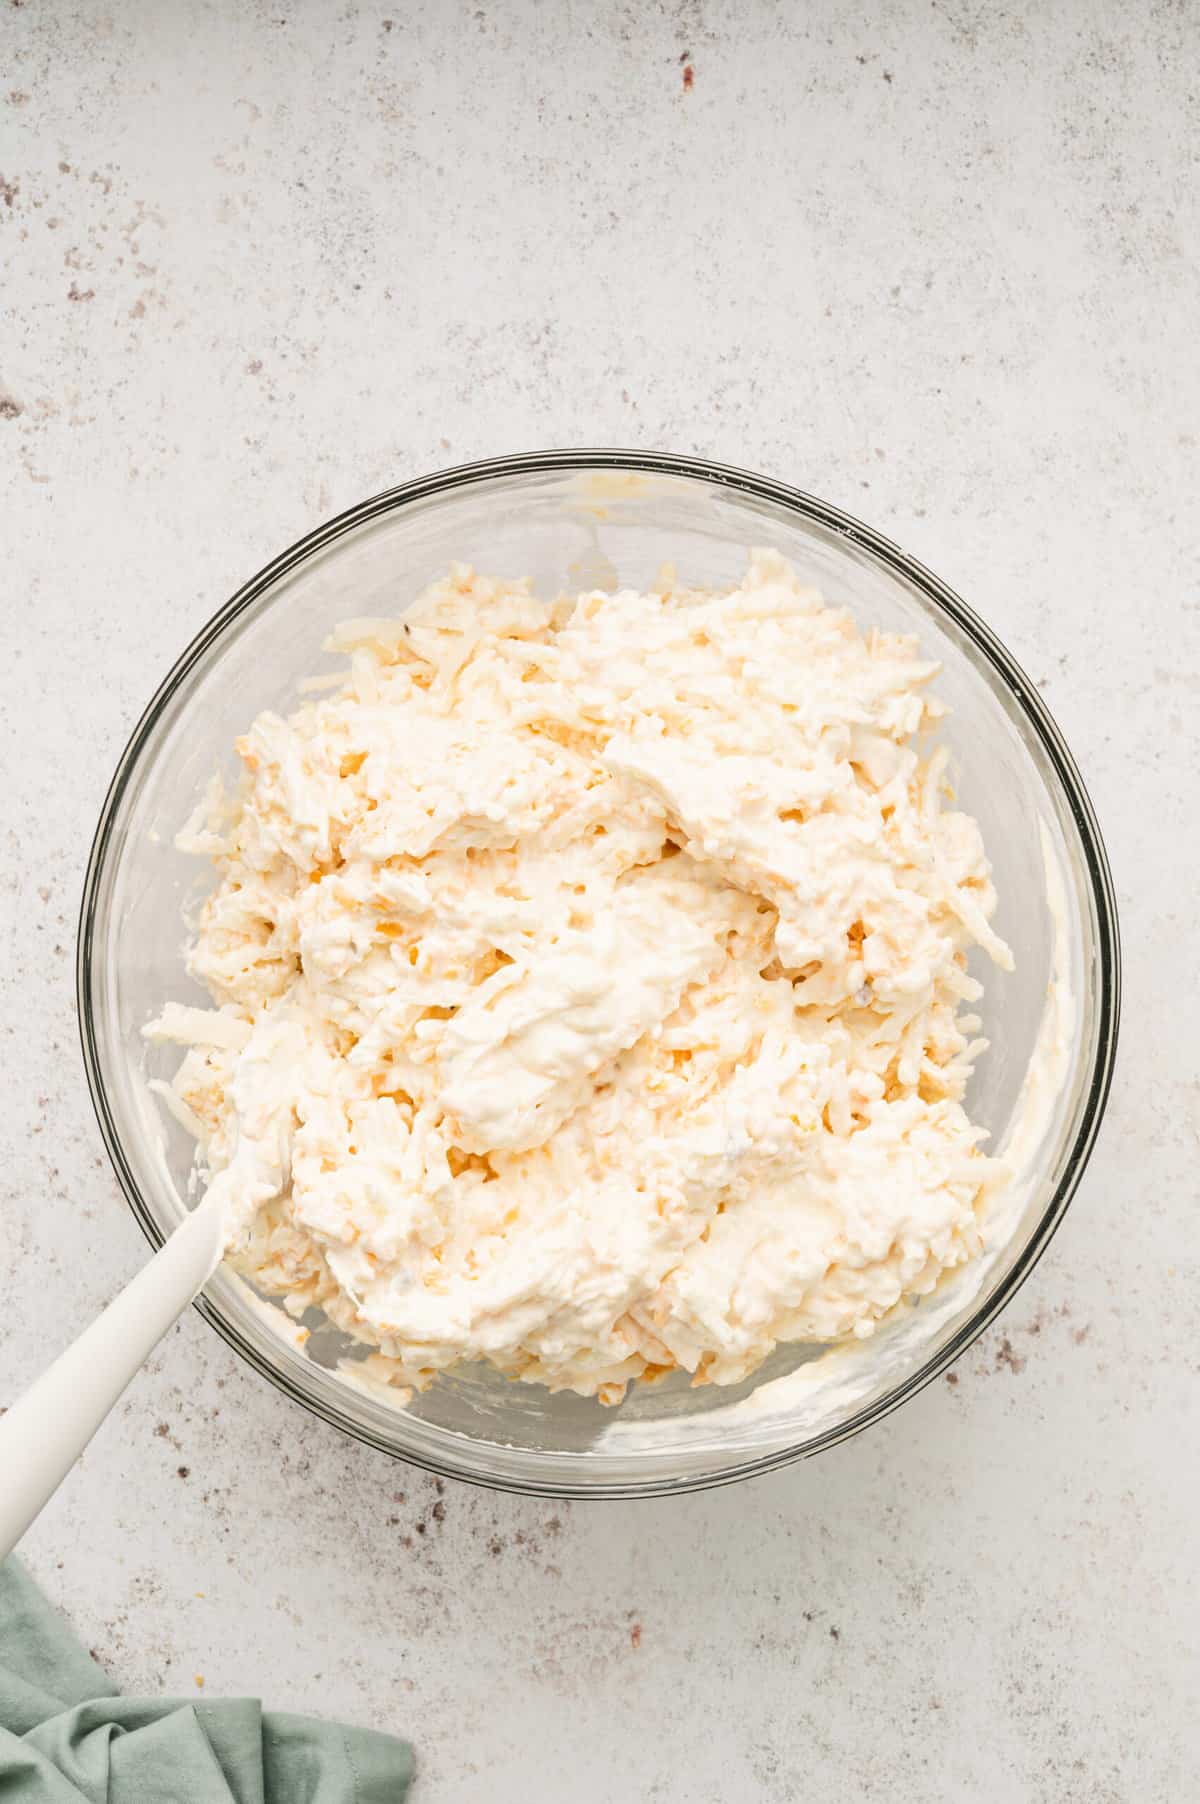 Adding shredded frozen hash browns to ingredient mixture for Cheesy Hashbrown Potatoes recipe